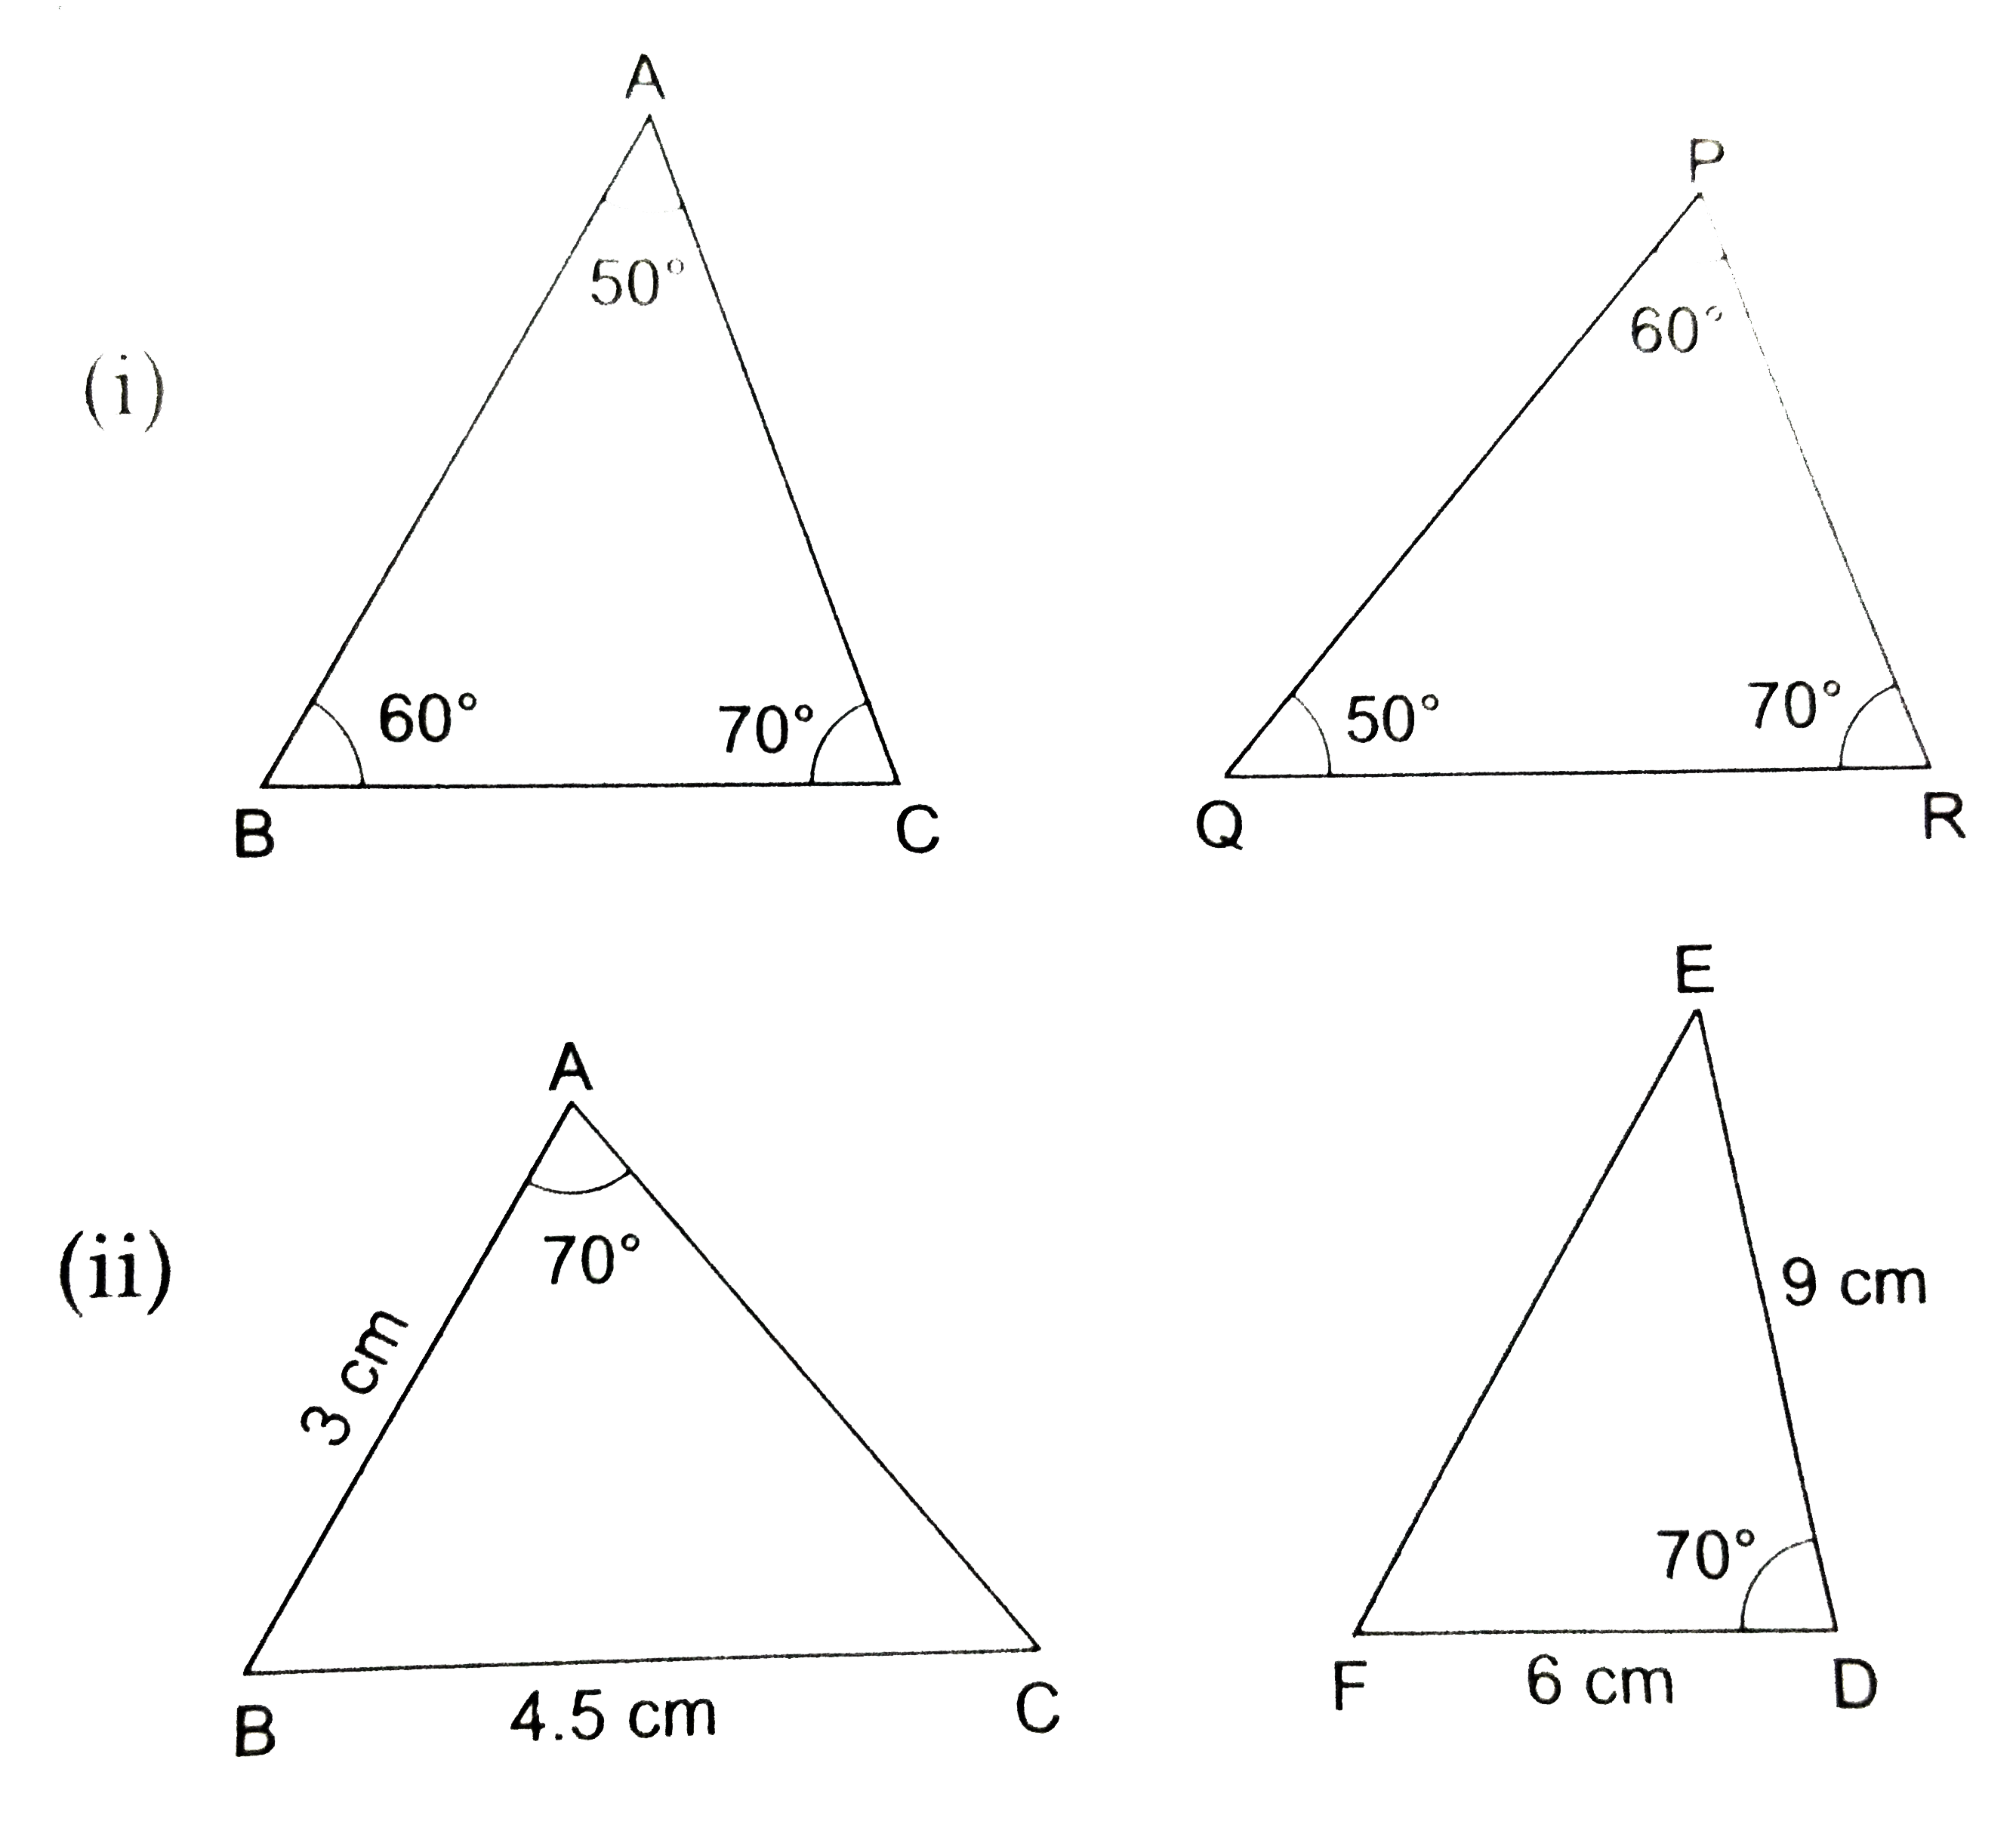 In each of the given pairs of triangles, find which pair of triangles are similar. State the similarity criterion and write the similarity relation in symbolic form.